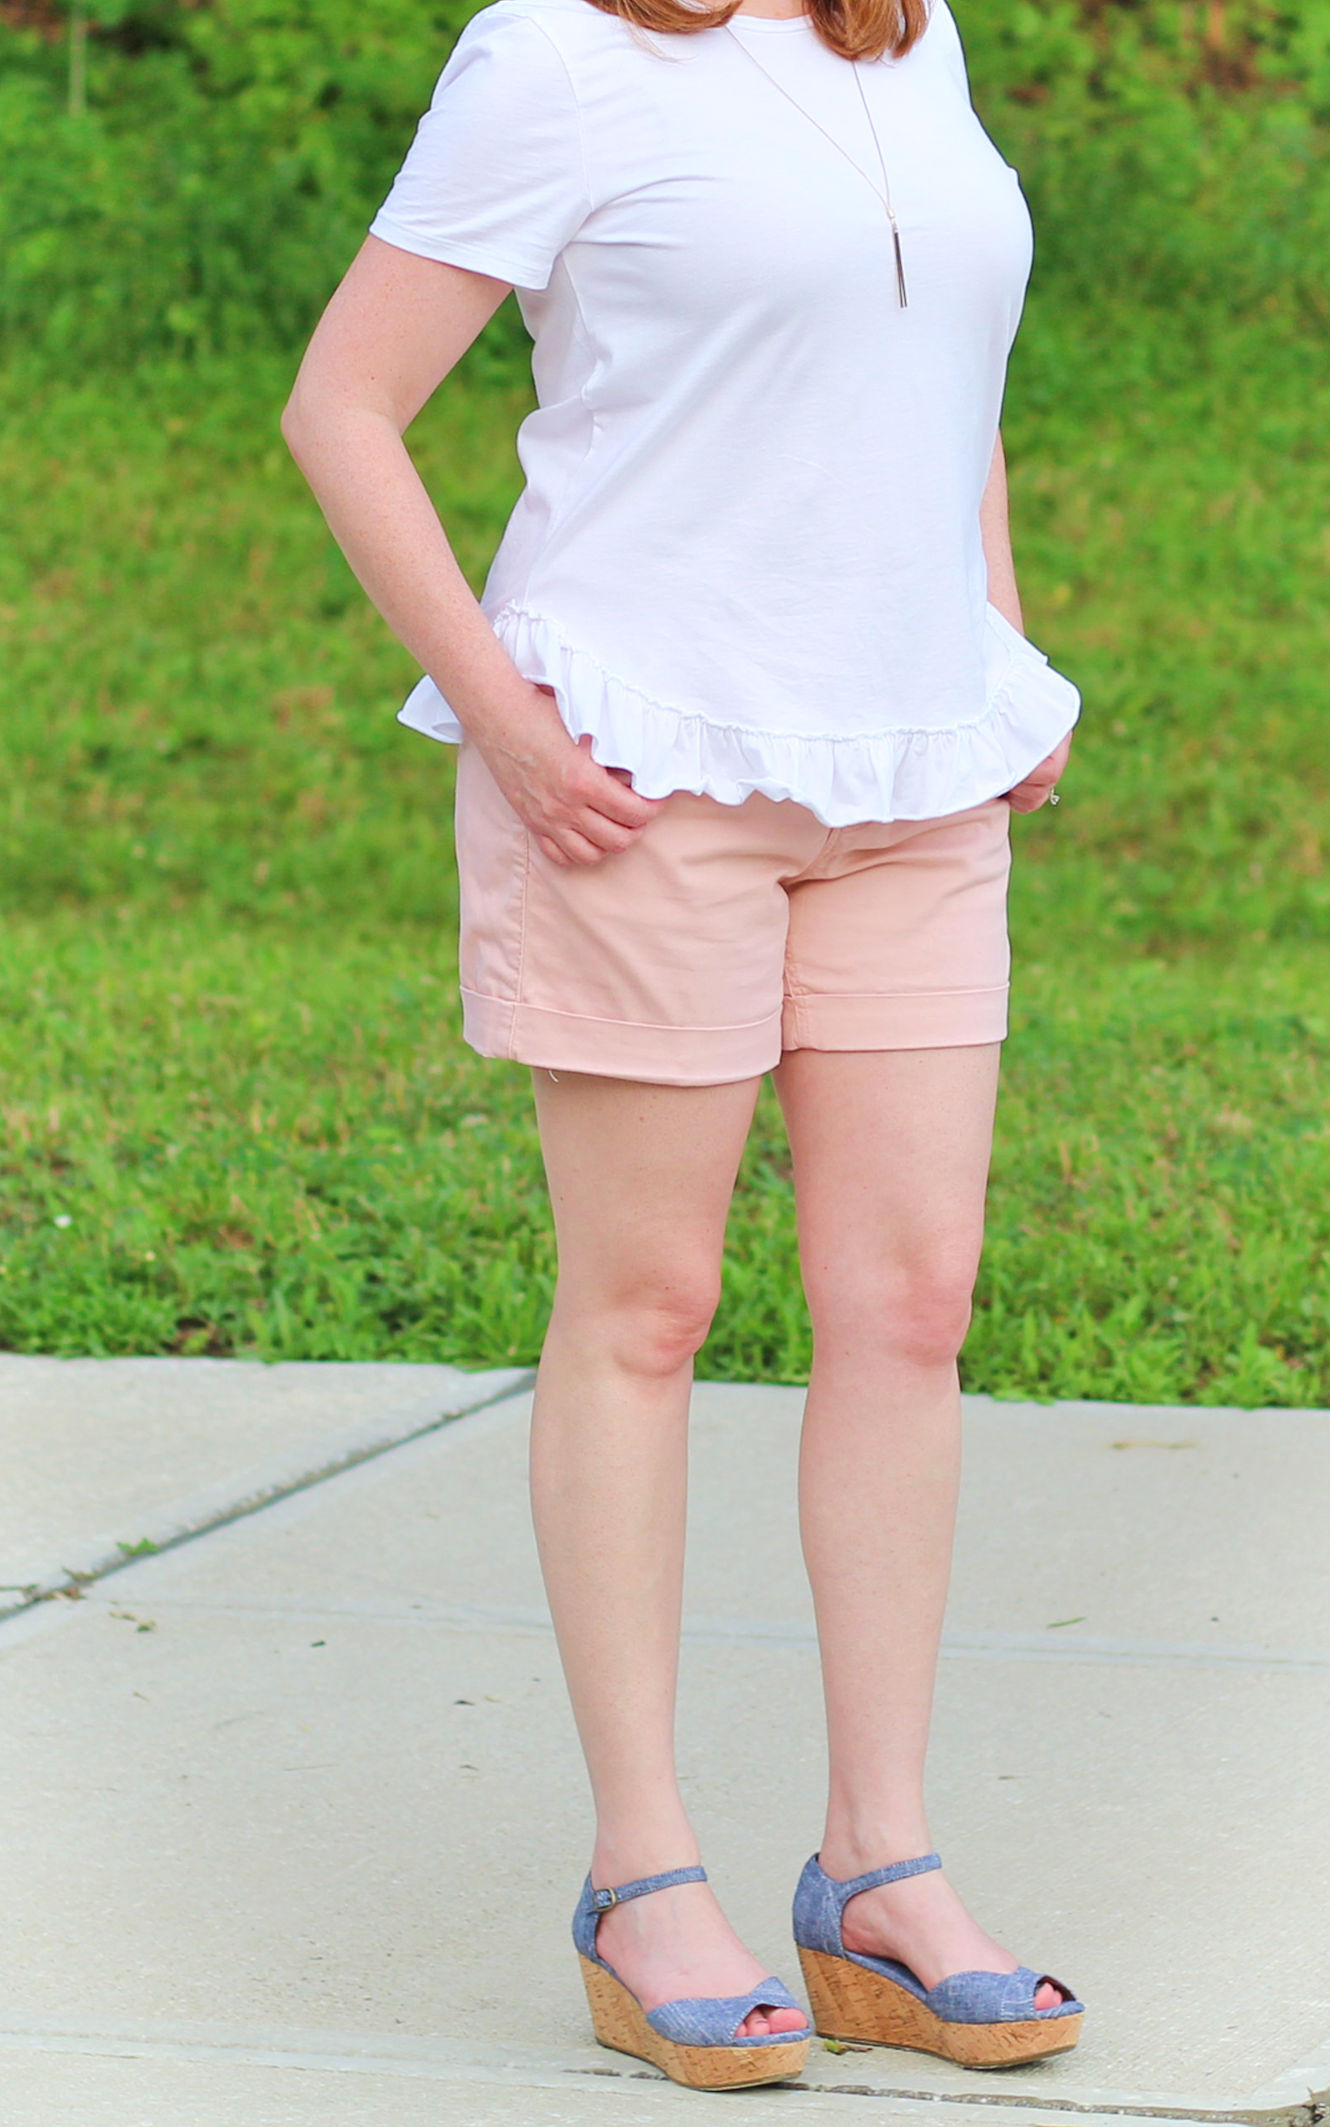 White Peplum Top And Blush Shorts #fashionover40 #summeroutfit